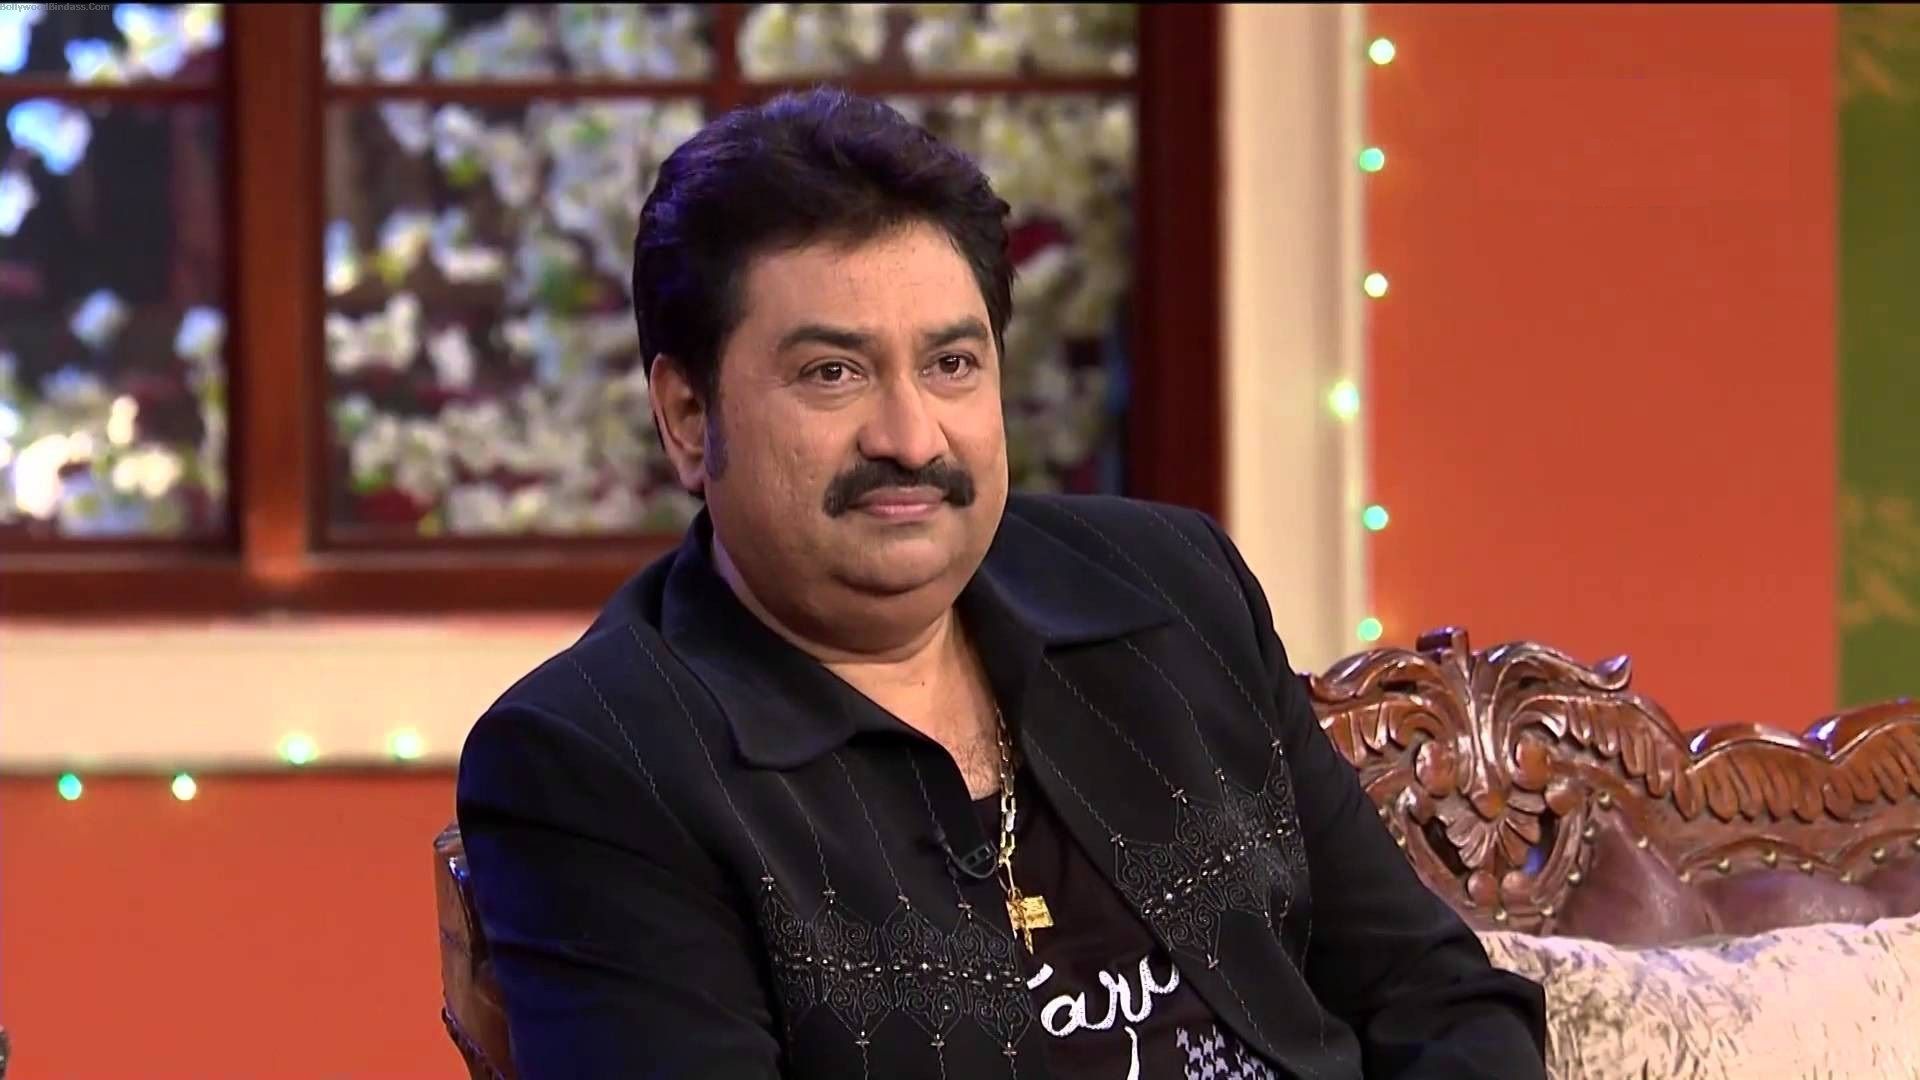 You're not a true Kumar Sanu fan if you can't answer these simple